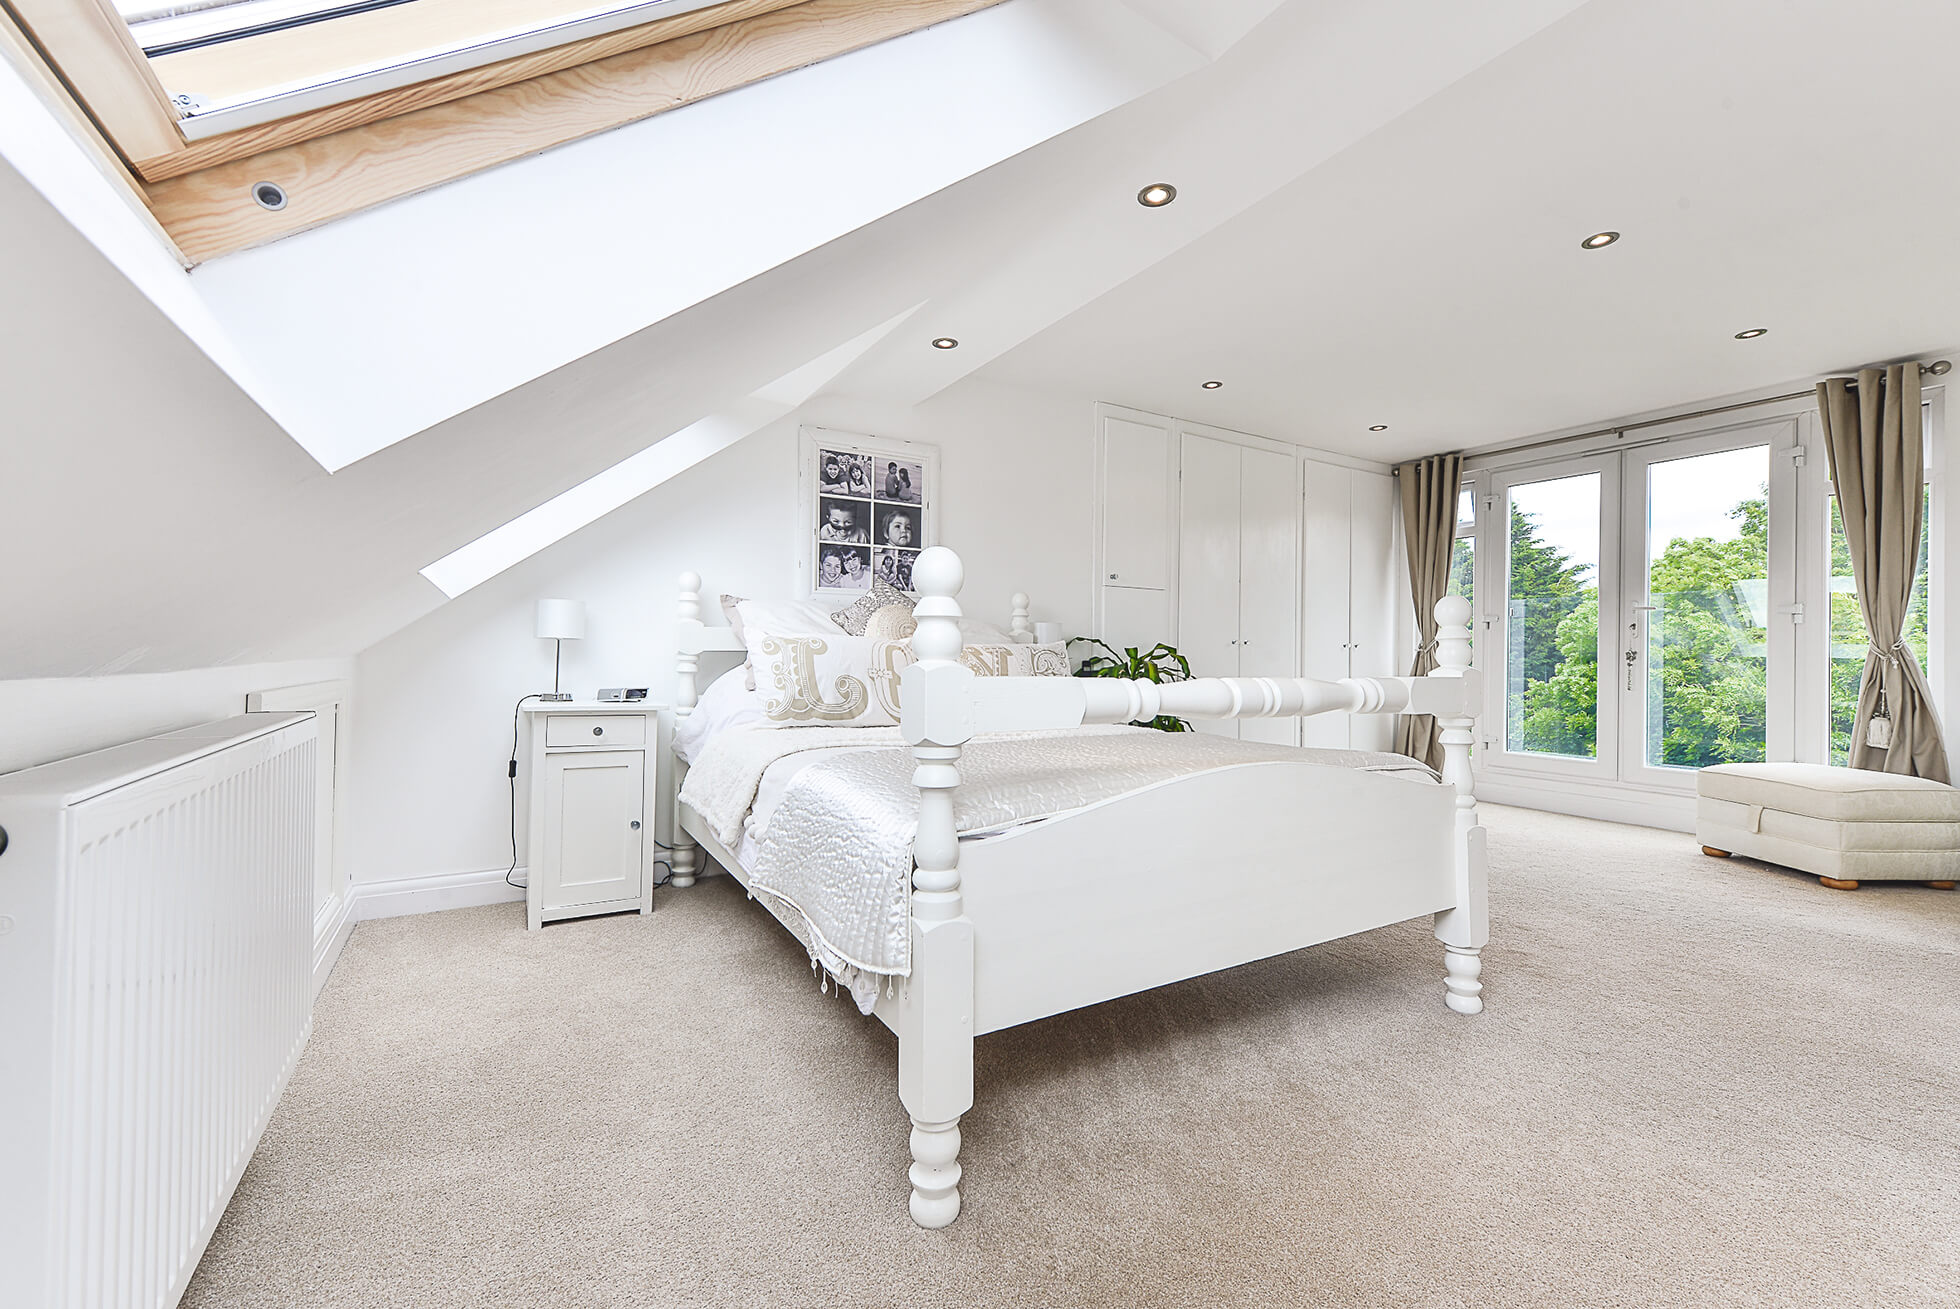 Do you have a question about converting your Loft in Bury Green? Here are the most popular questions asked by our clients.